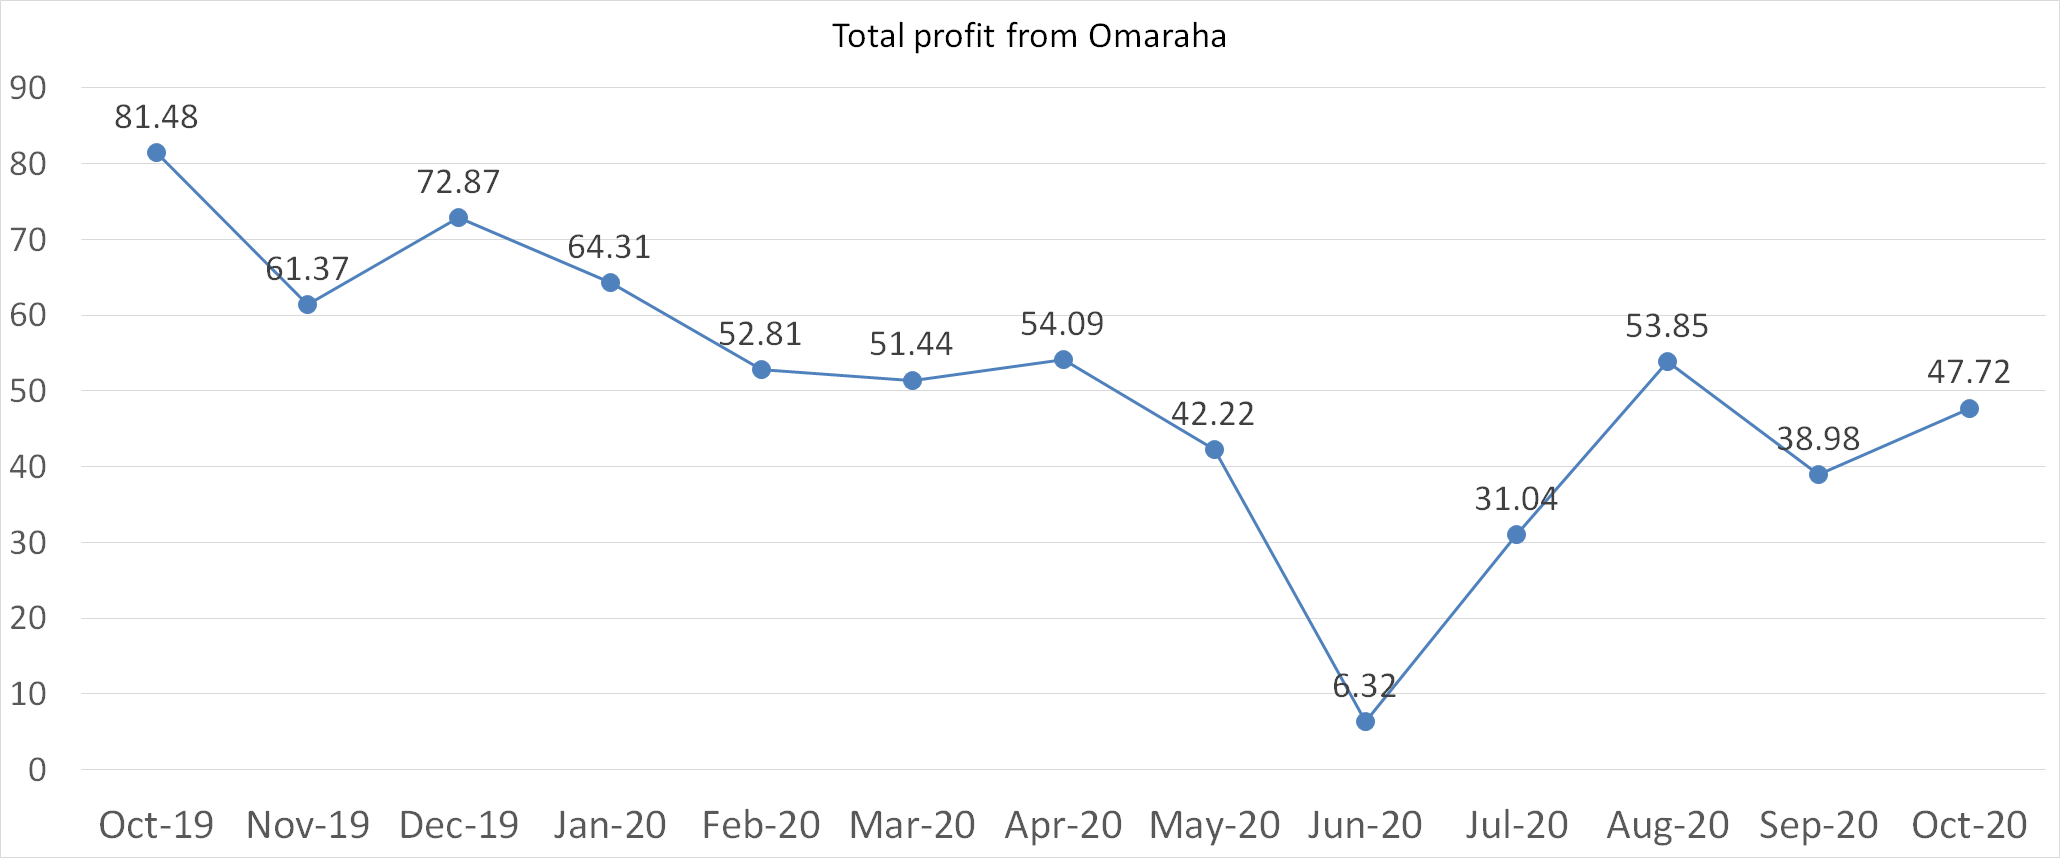 Total profit from Omaraha october 2020